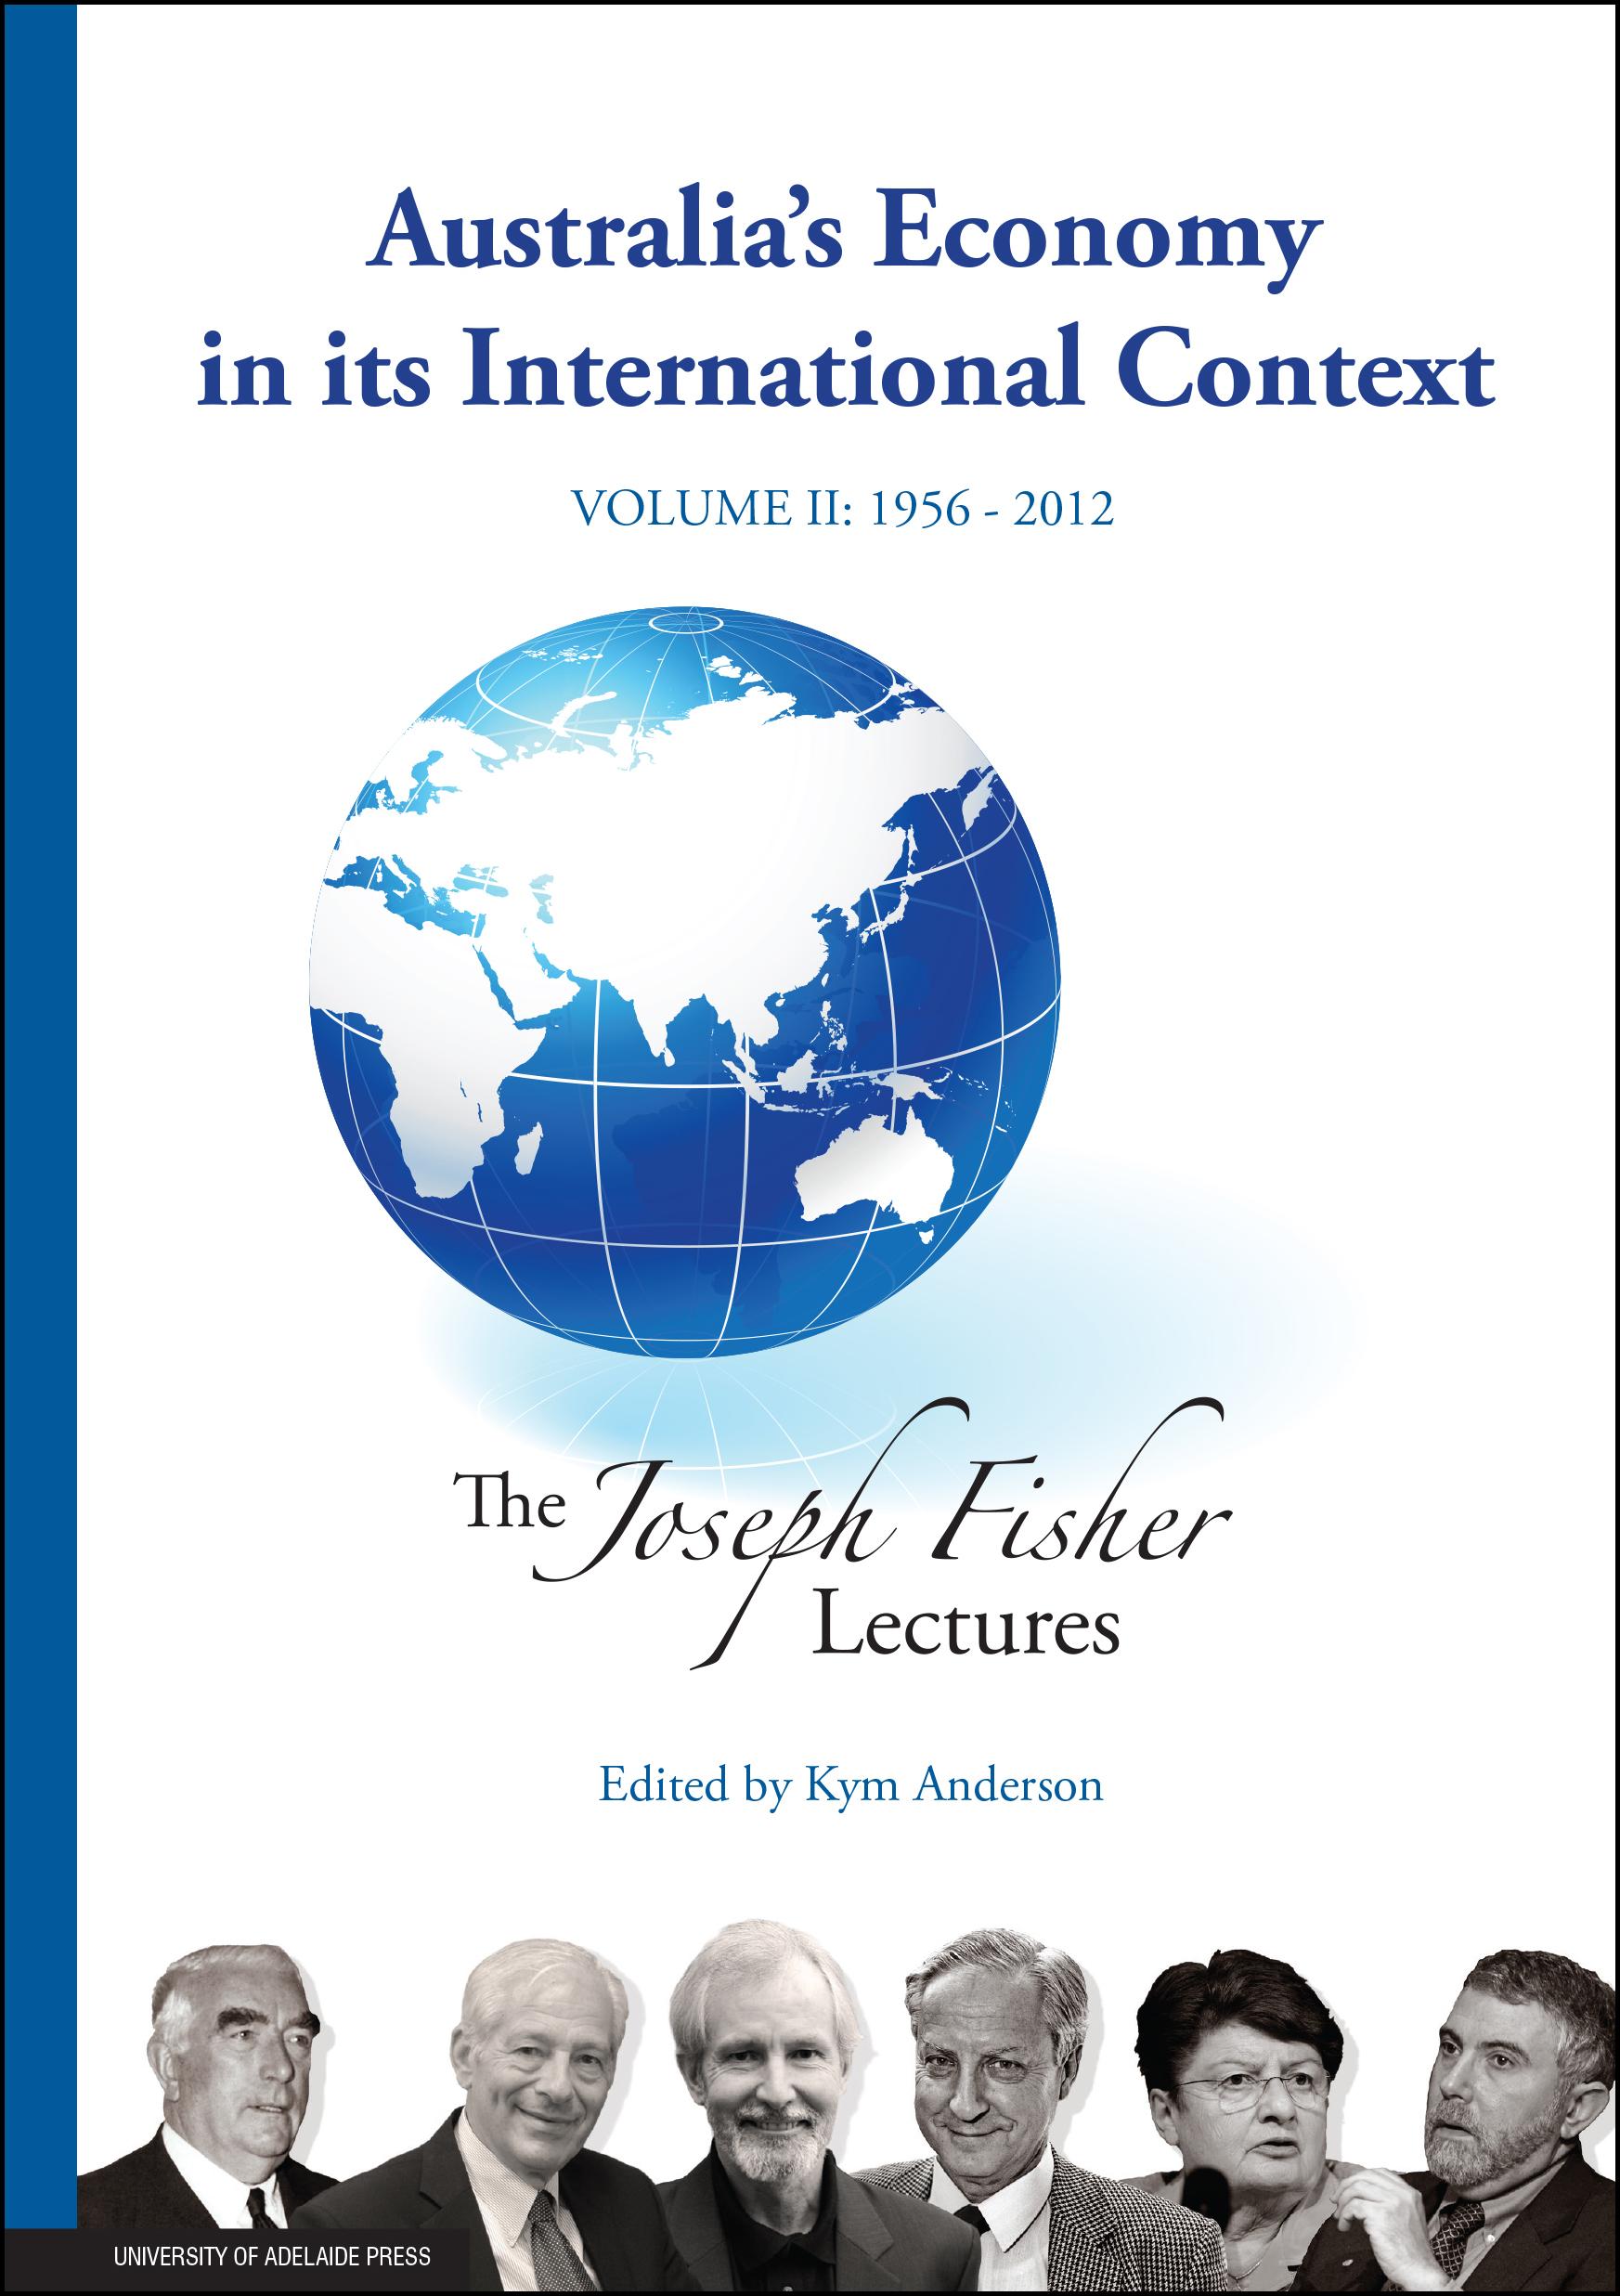 Fisher lectures cover